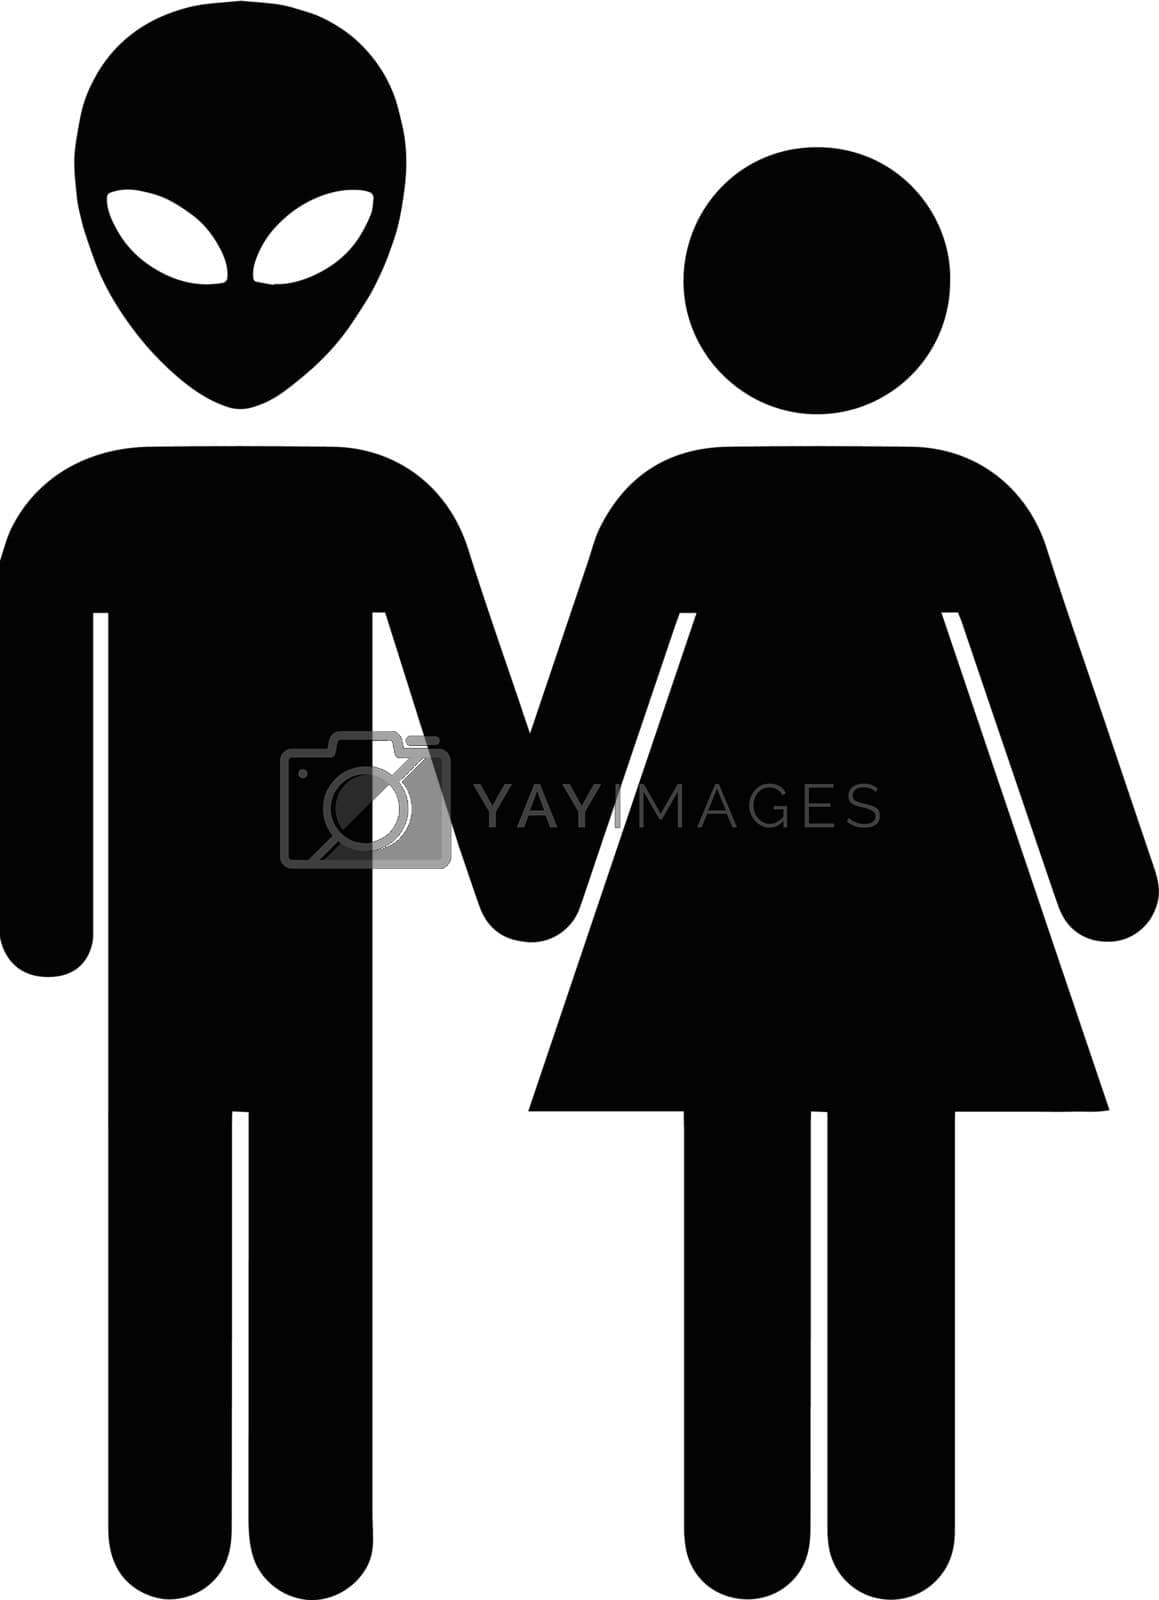 Royalty free image of Alien Couple Funny Restroom Bathroom Sign Space by toosweetinc